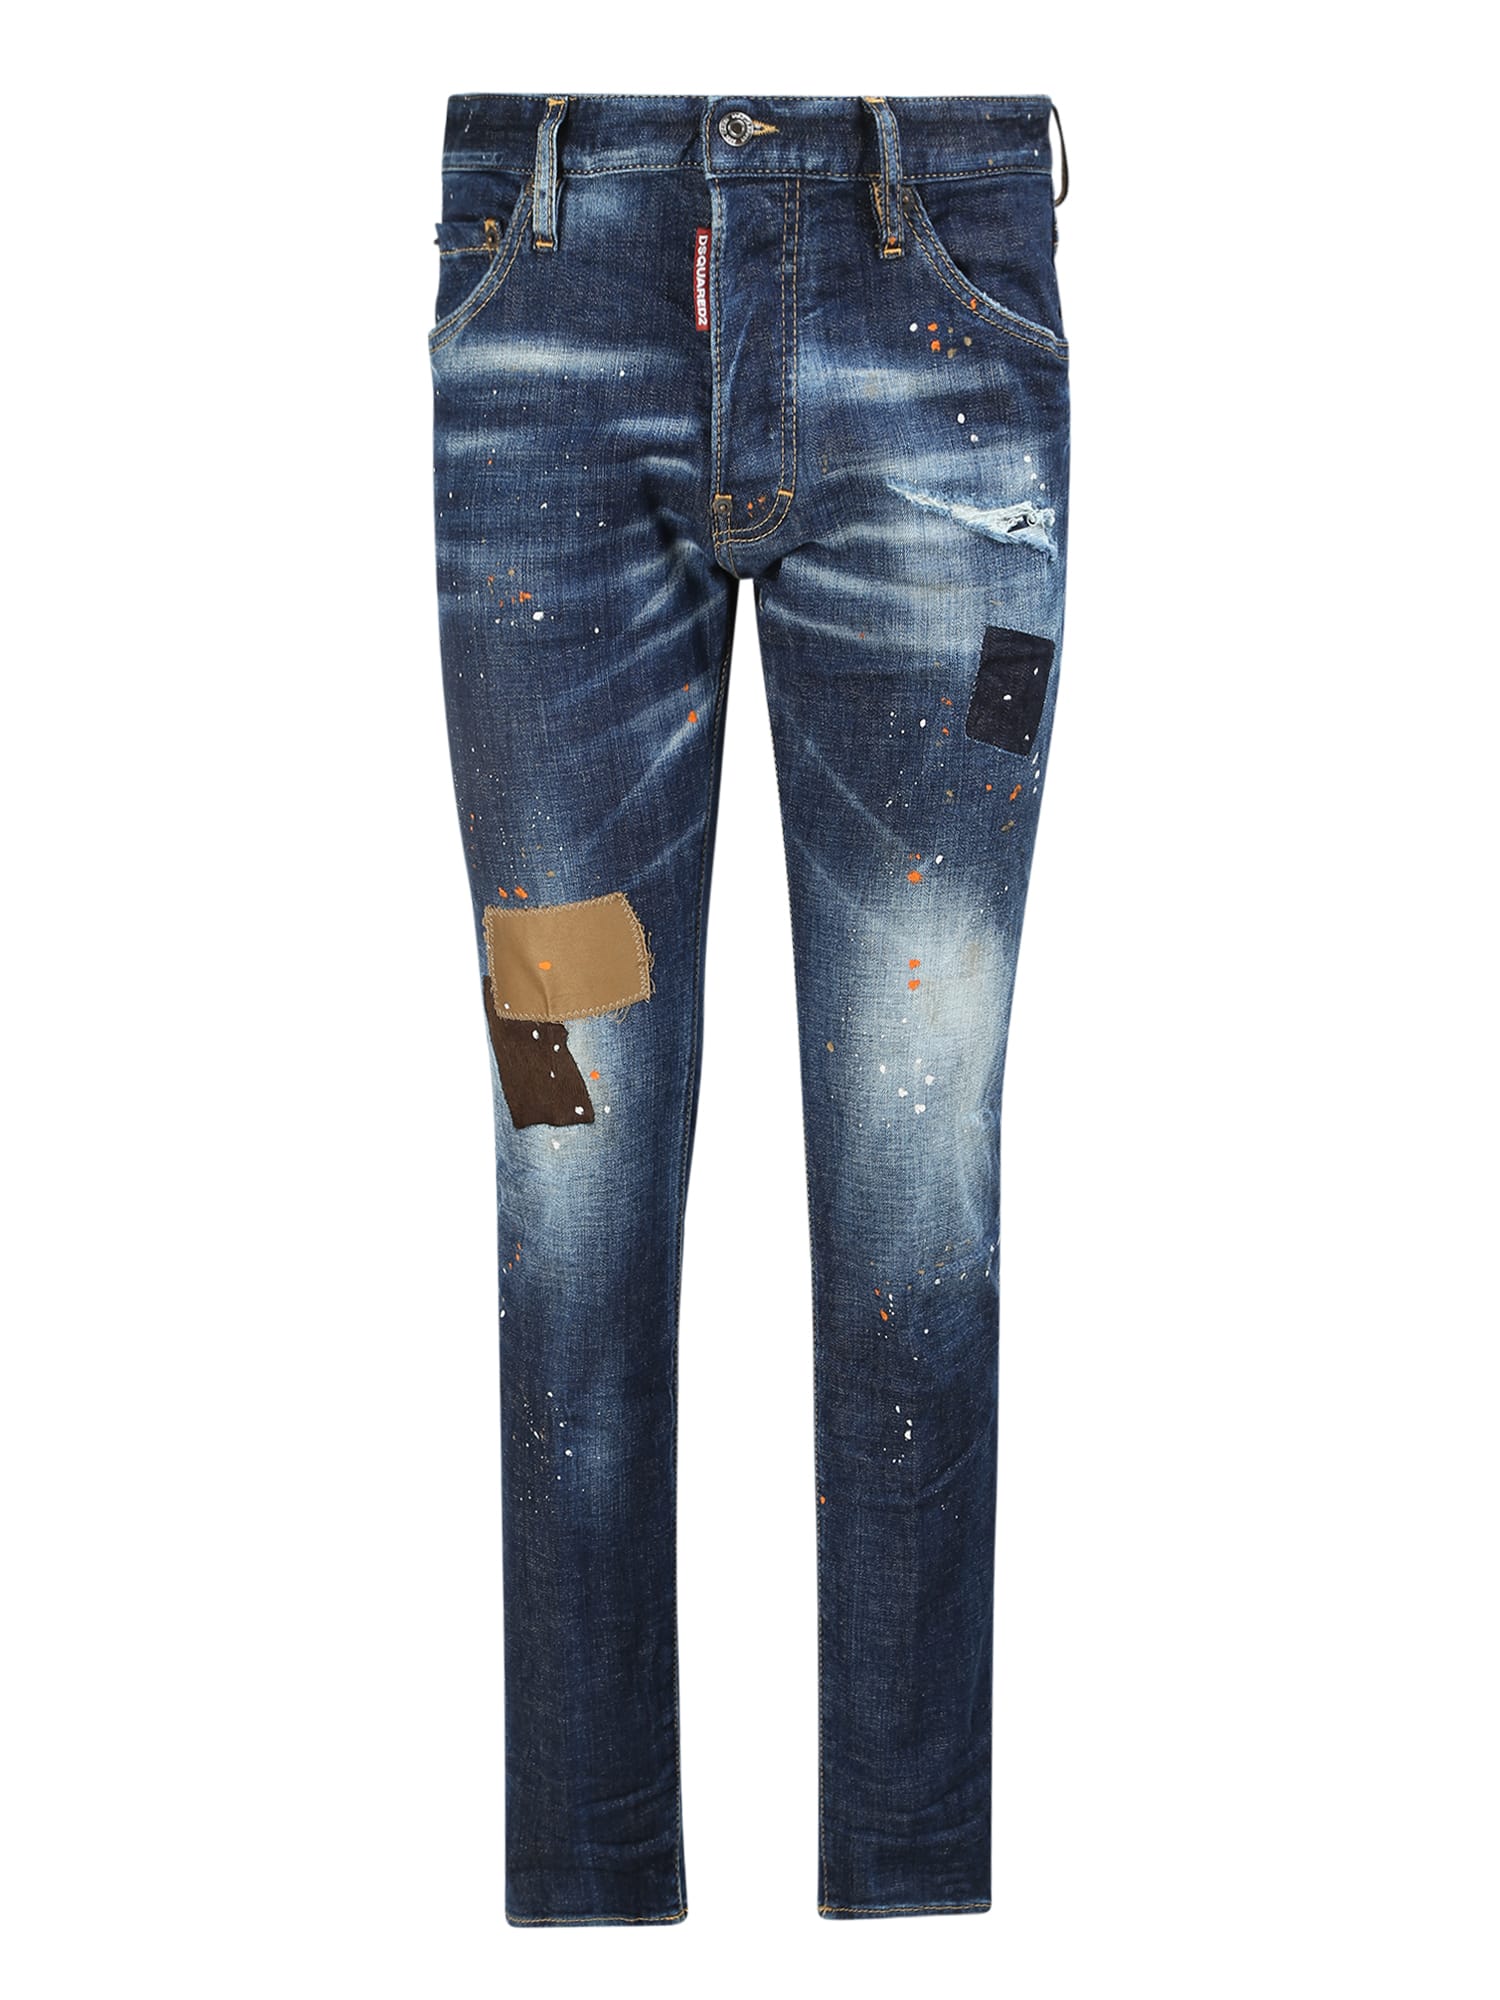 This Jeans By Dsquared2 Features A Paint-splatter Effect, Making It A Carefree And Suitable Garment For Every Day